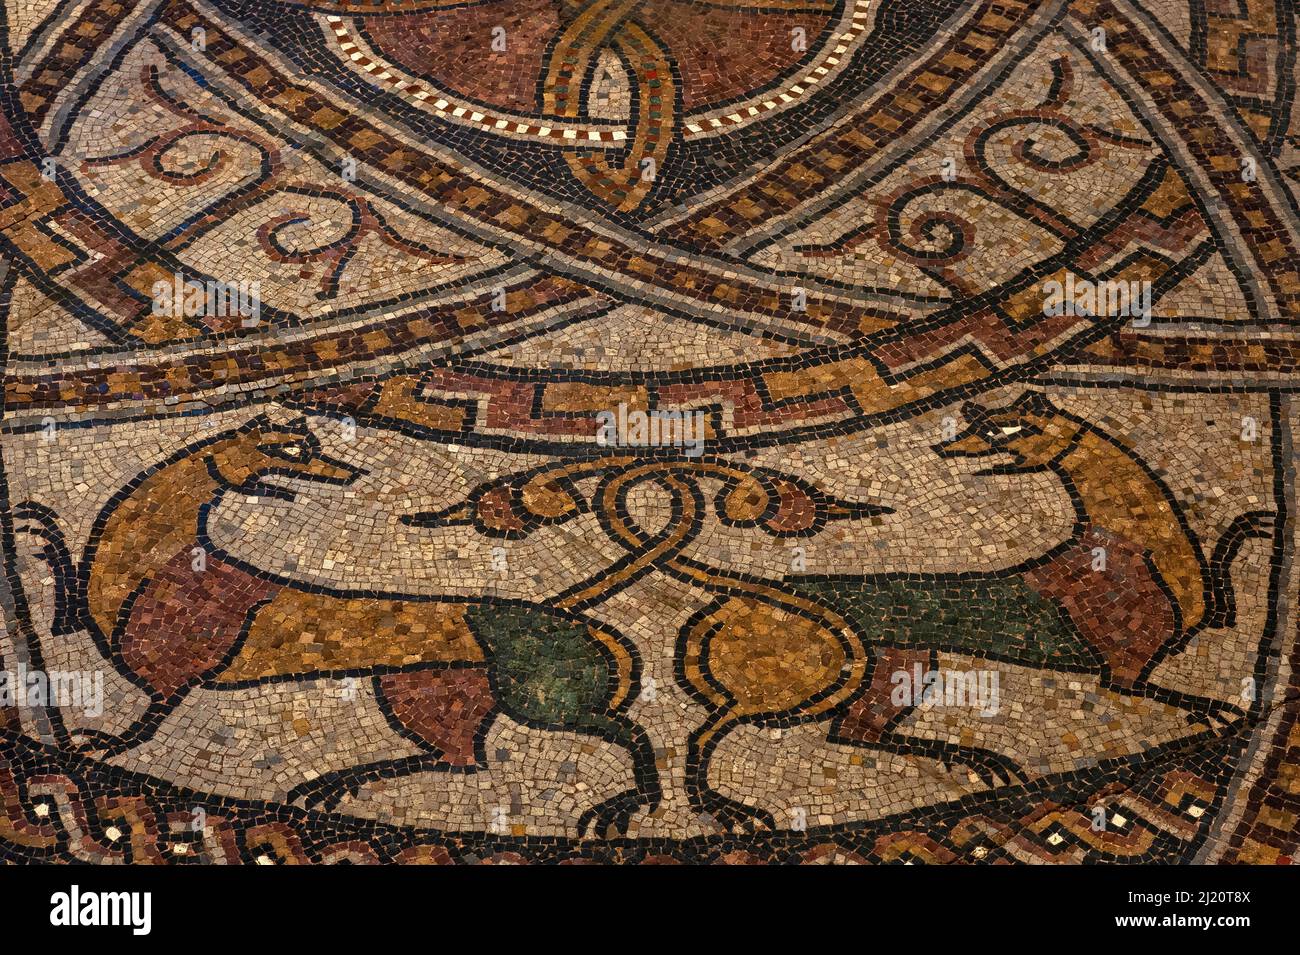 Pair of cats, tails entwined and heads turned to glare at each other.  Detail of medieval mosaic in restored late-1000s or early 1100s pavement in former Benedictine abbey church at Sorde l'Abbaye, Landes, Nouvelle-Aquitaine, France. Stock Photo